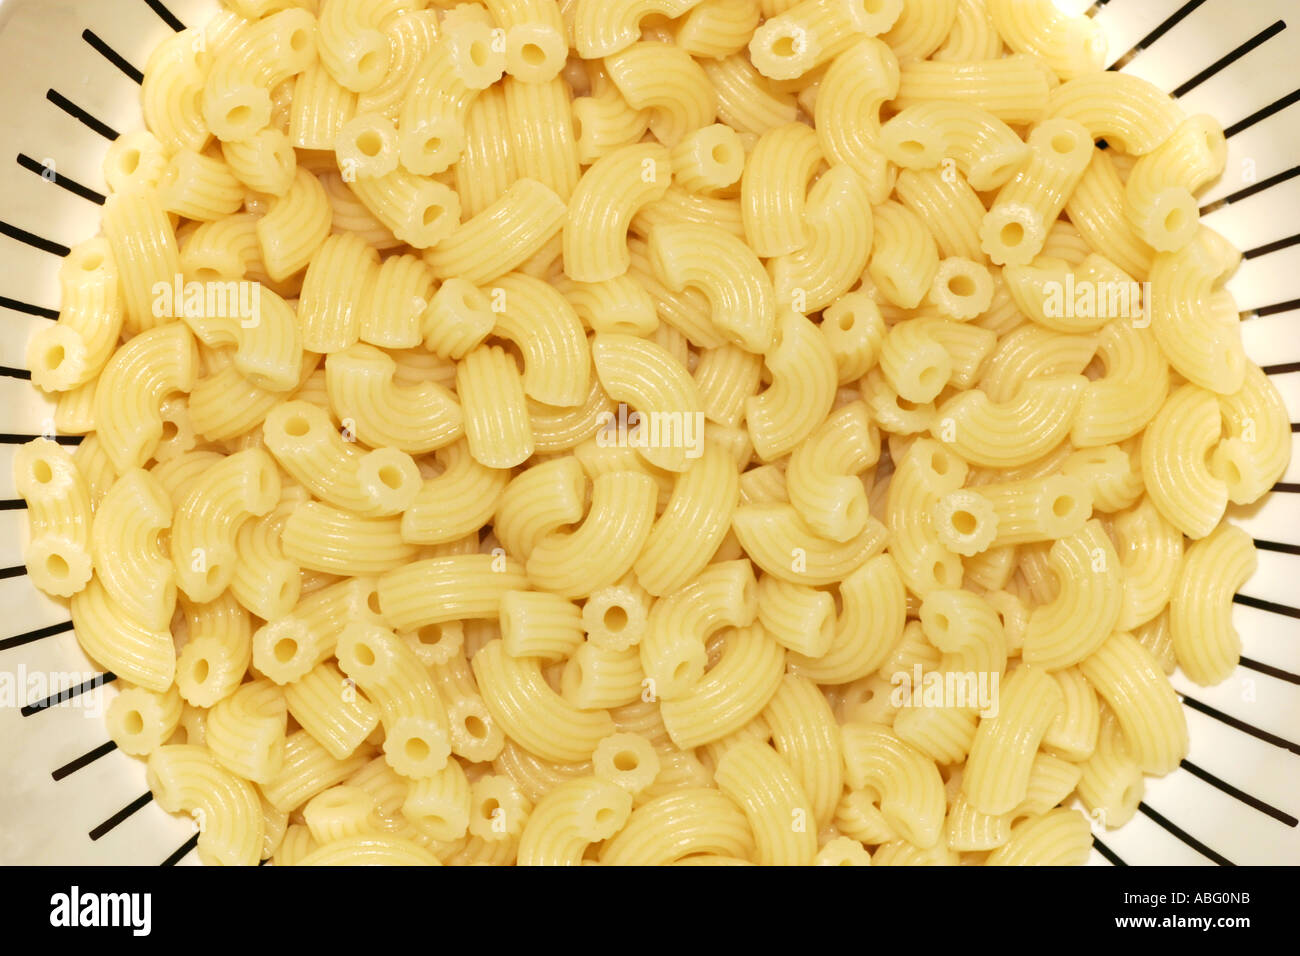 Newly coocked macaroni in a colander Stock Photo